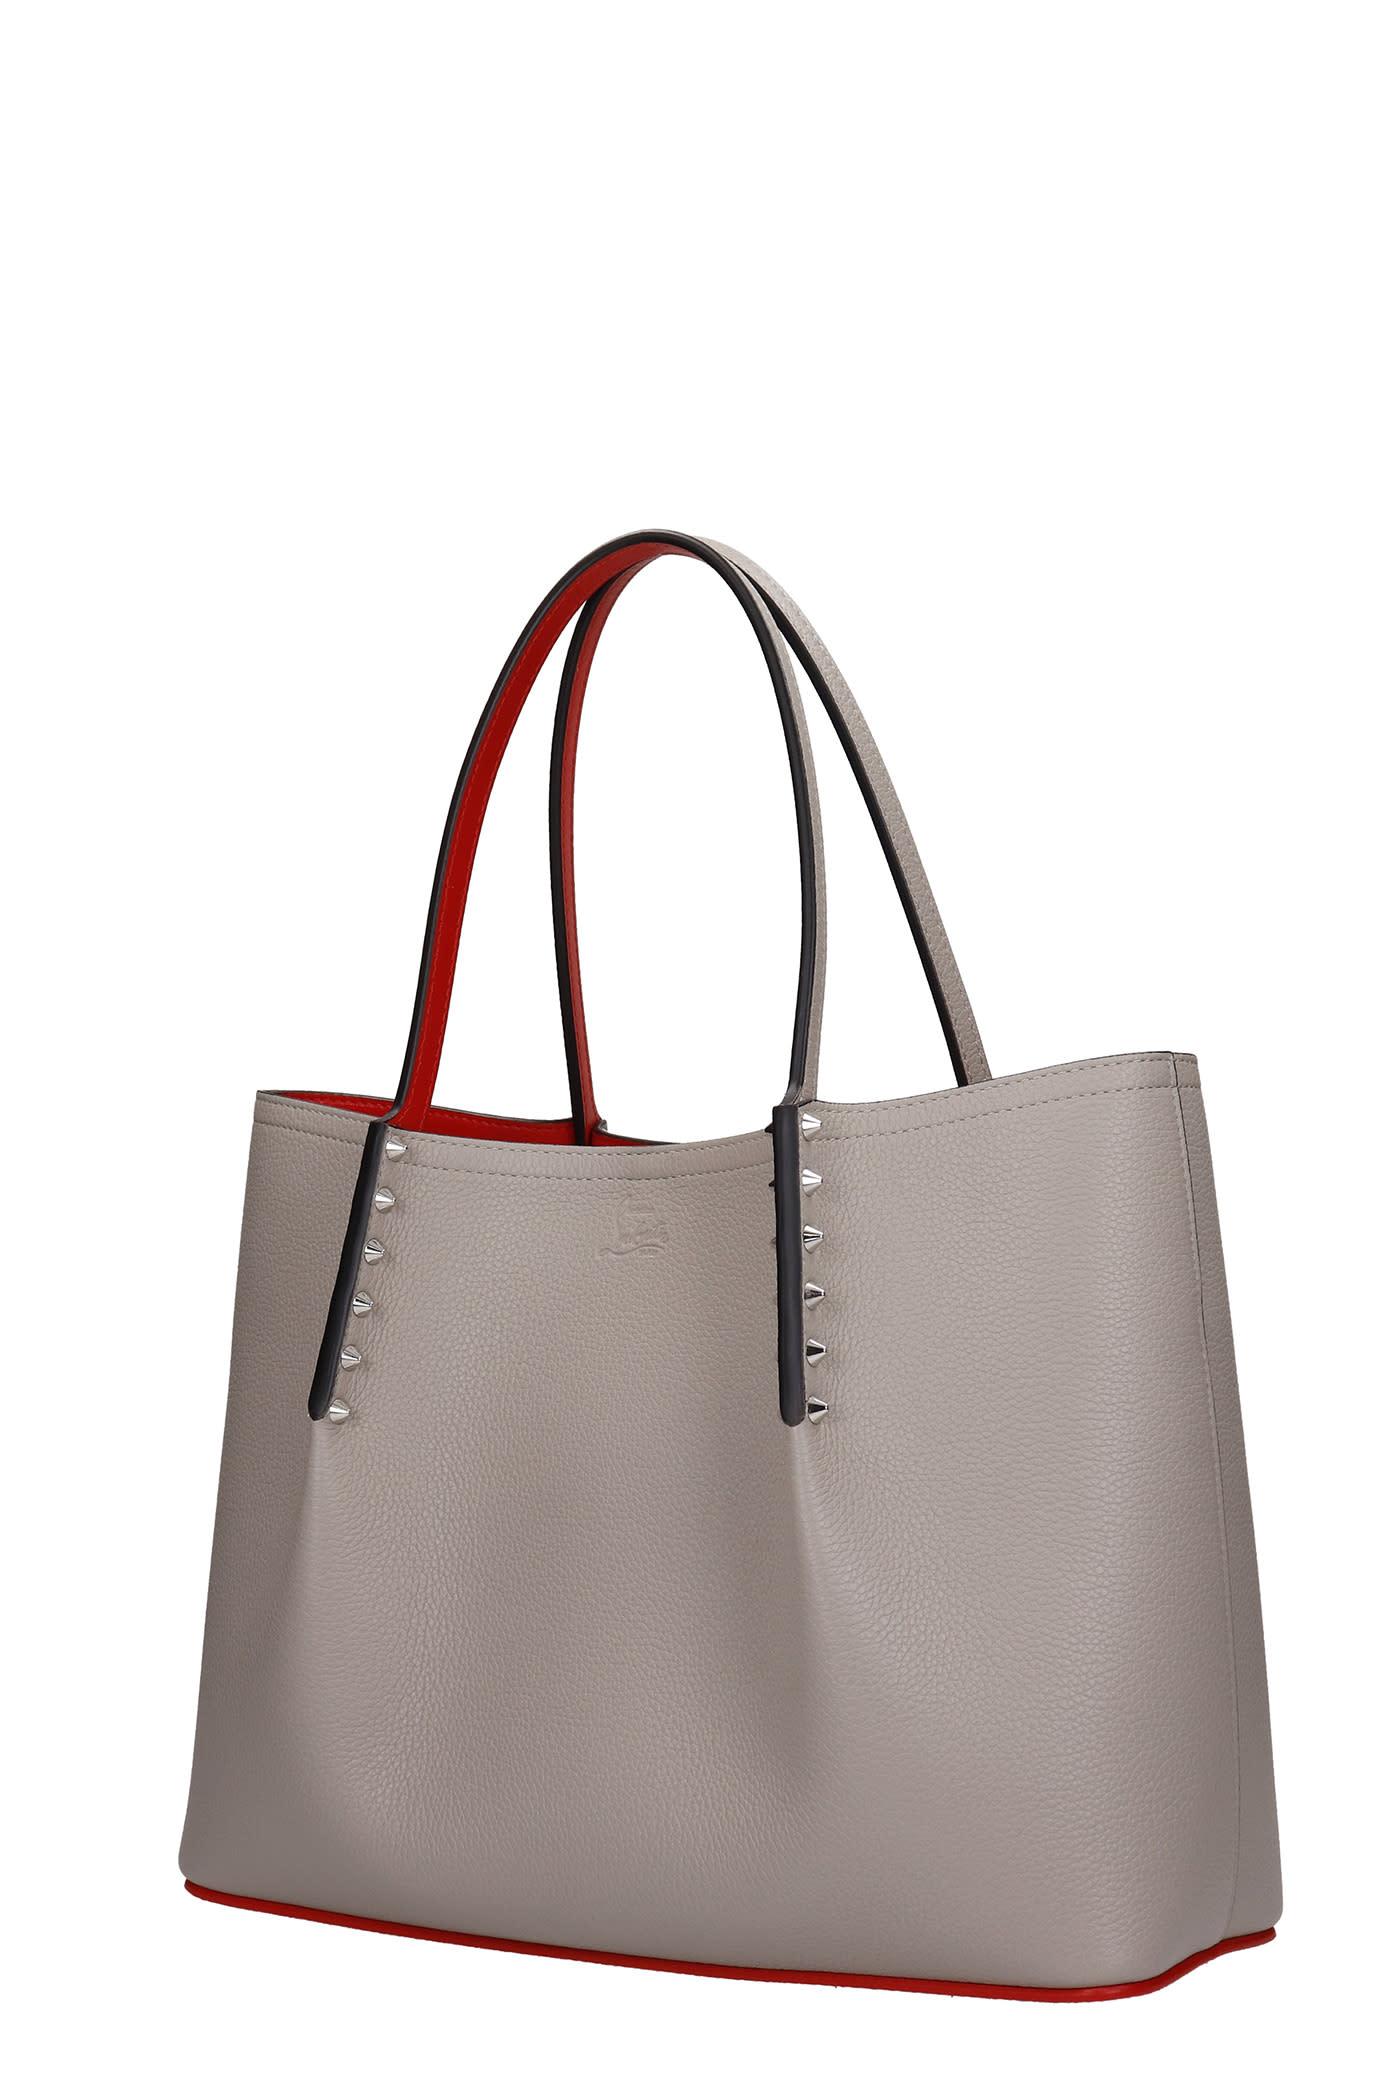 Christian Louboutin Cabarock Tote In Grey Leather in Gray | Lyst